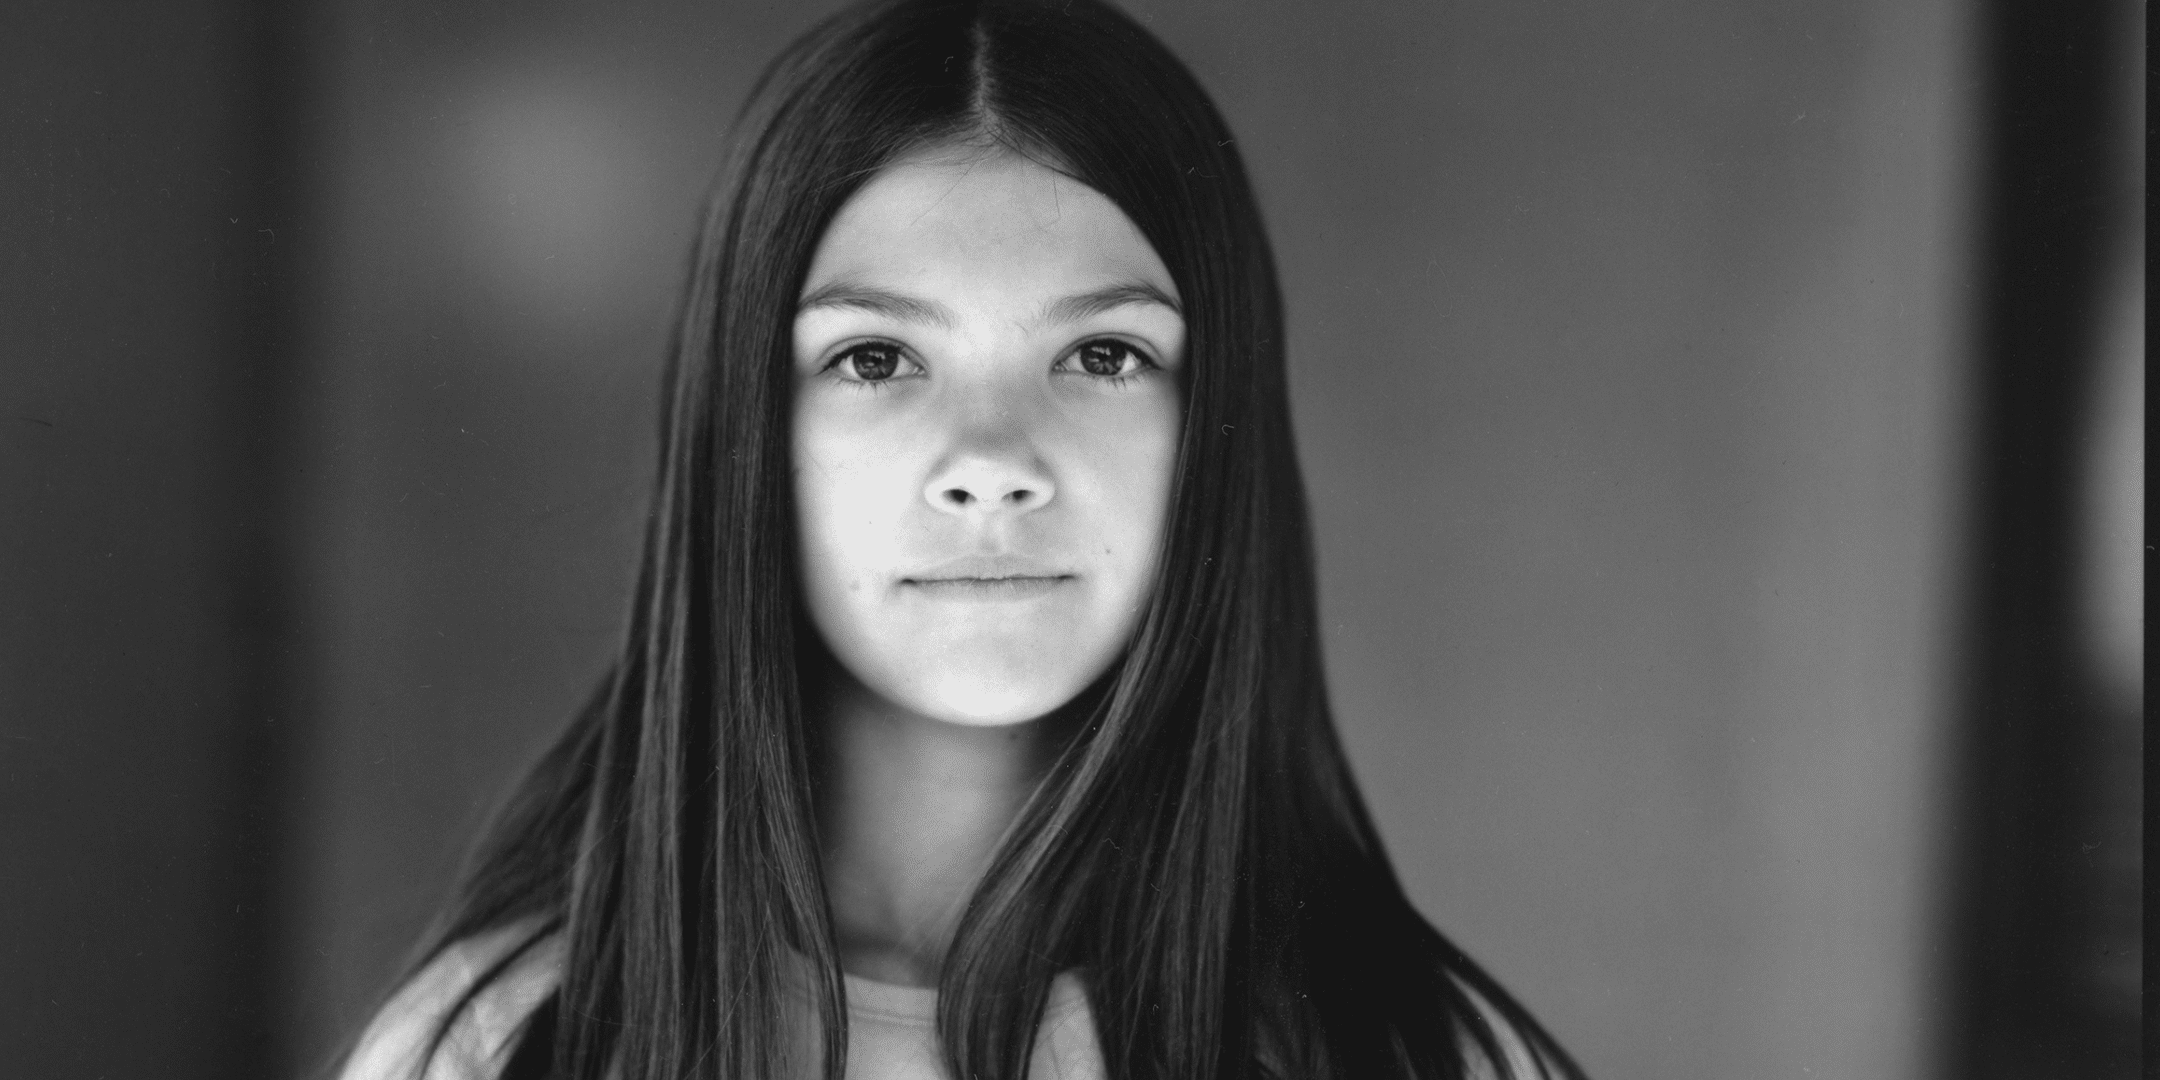 Black and white image of a young girl white long dark hair.